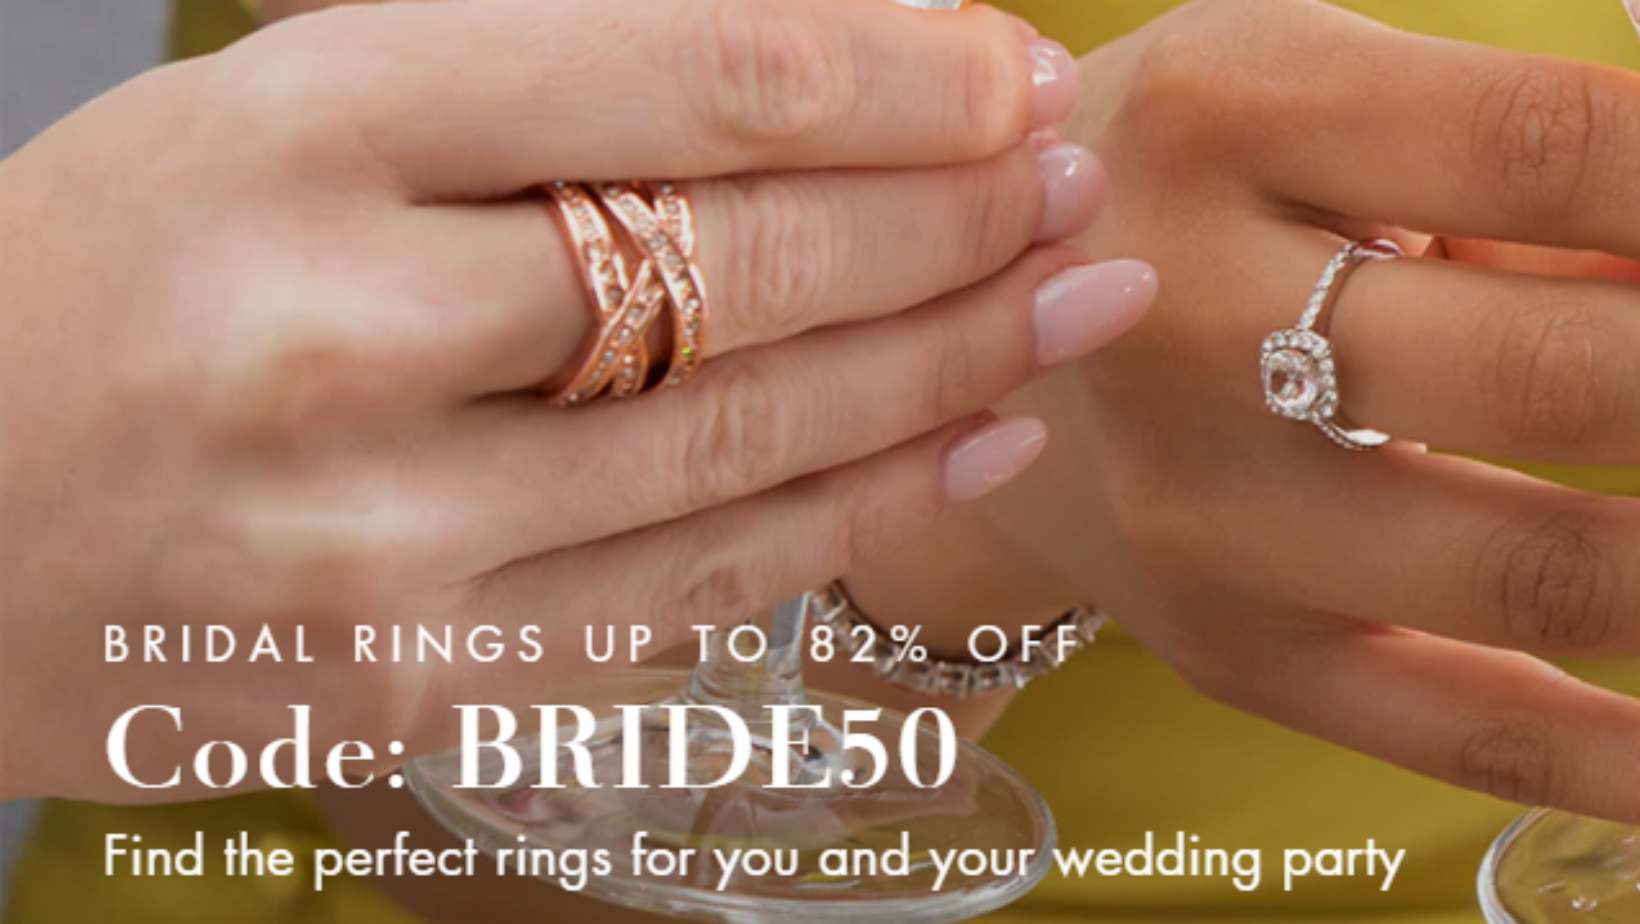 From Engagement to Forever: Celebrate Your Love Story with Cate & Chloe's Bridal Rings